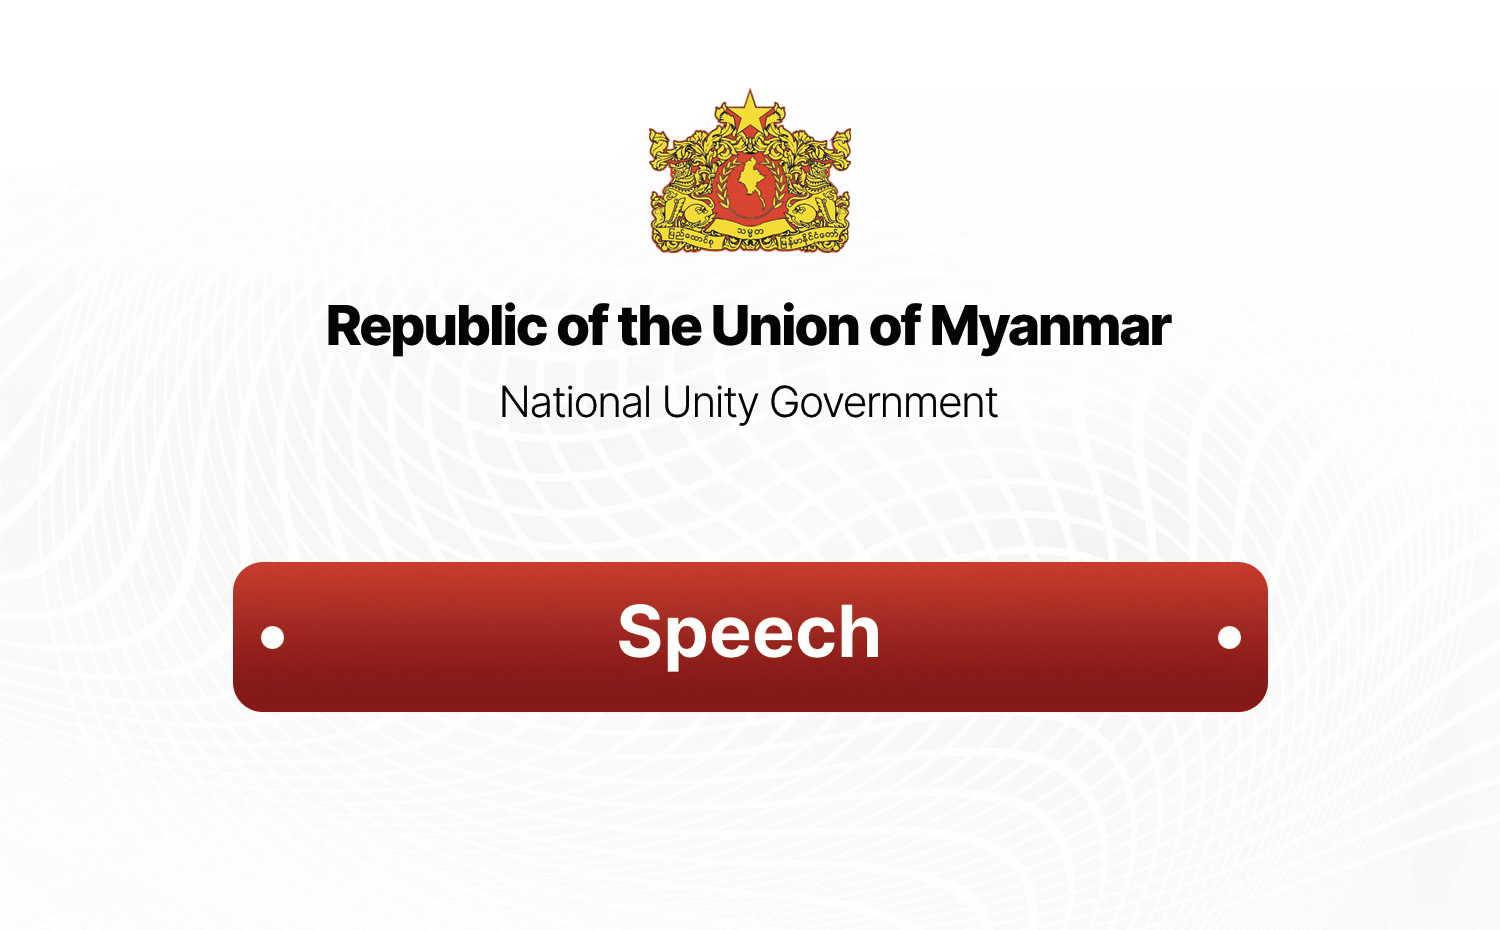 National Unity Government (NUG) of the Republic of the Union of Myanmar Address to the Association of Southeast Asian Nations (ASEAN) Summit 2021